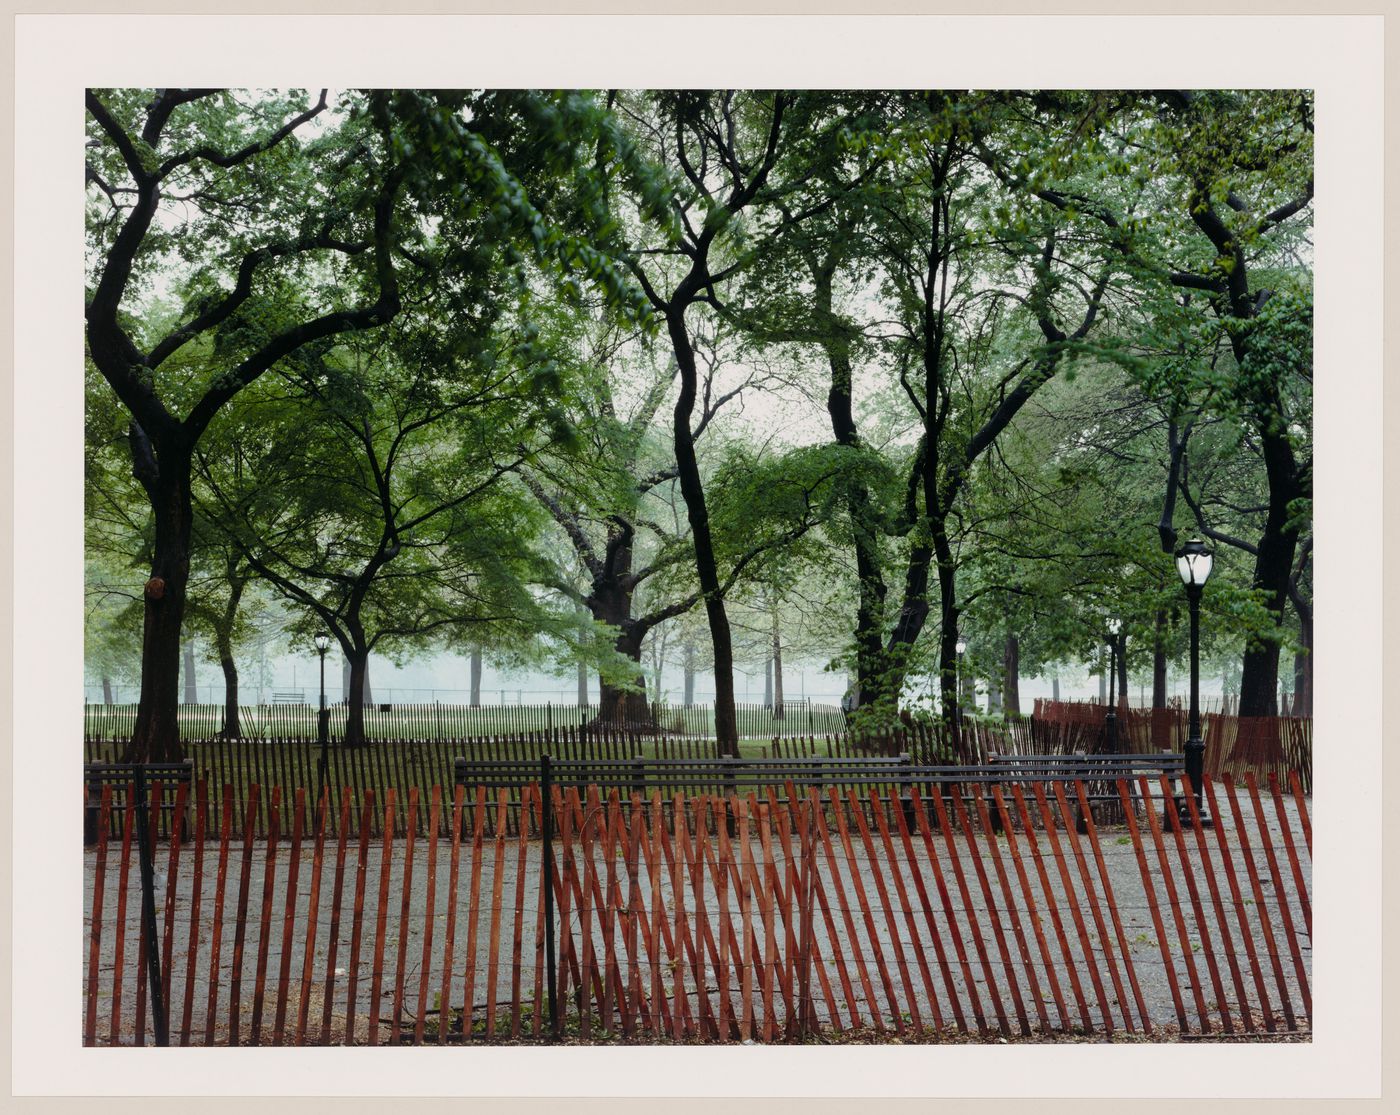 Viewing Olmsted: View of fence with trees in background, The Mall, Central Park, New York City, New York